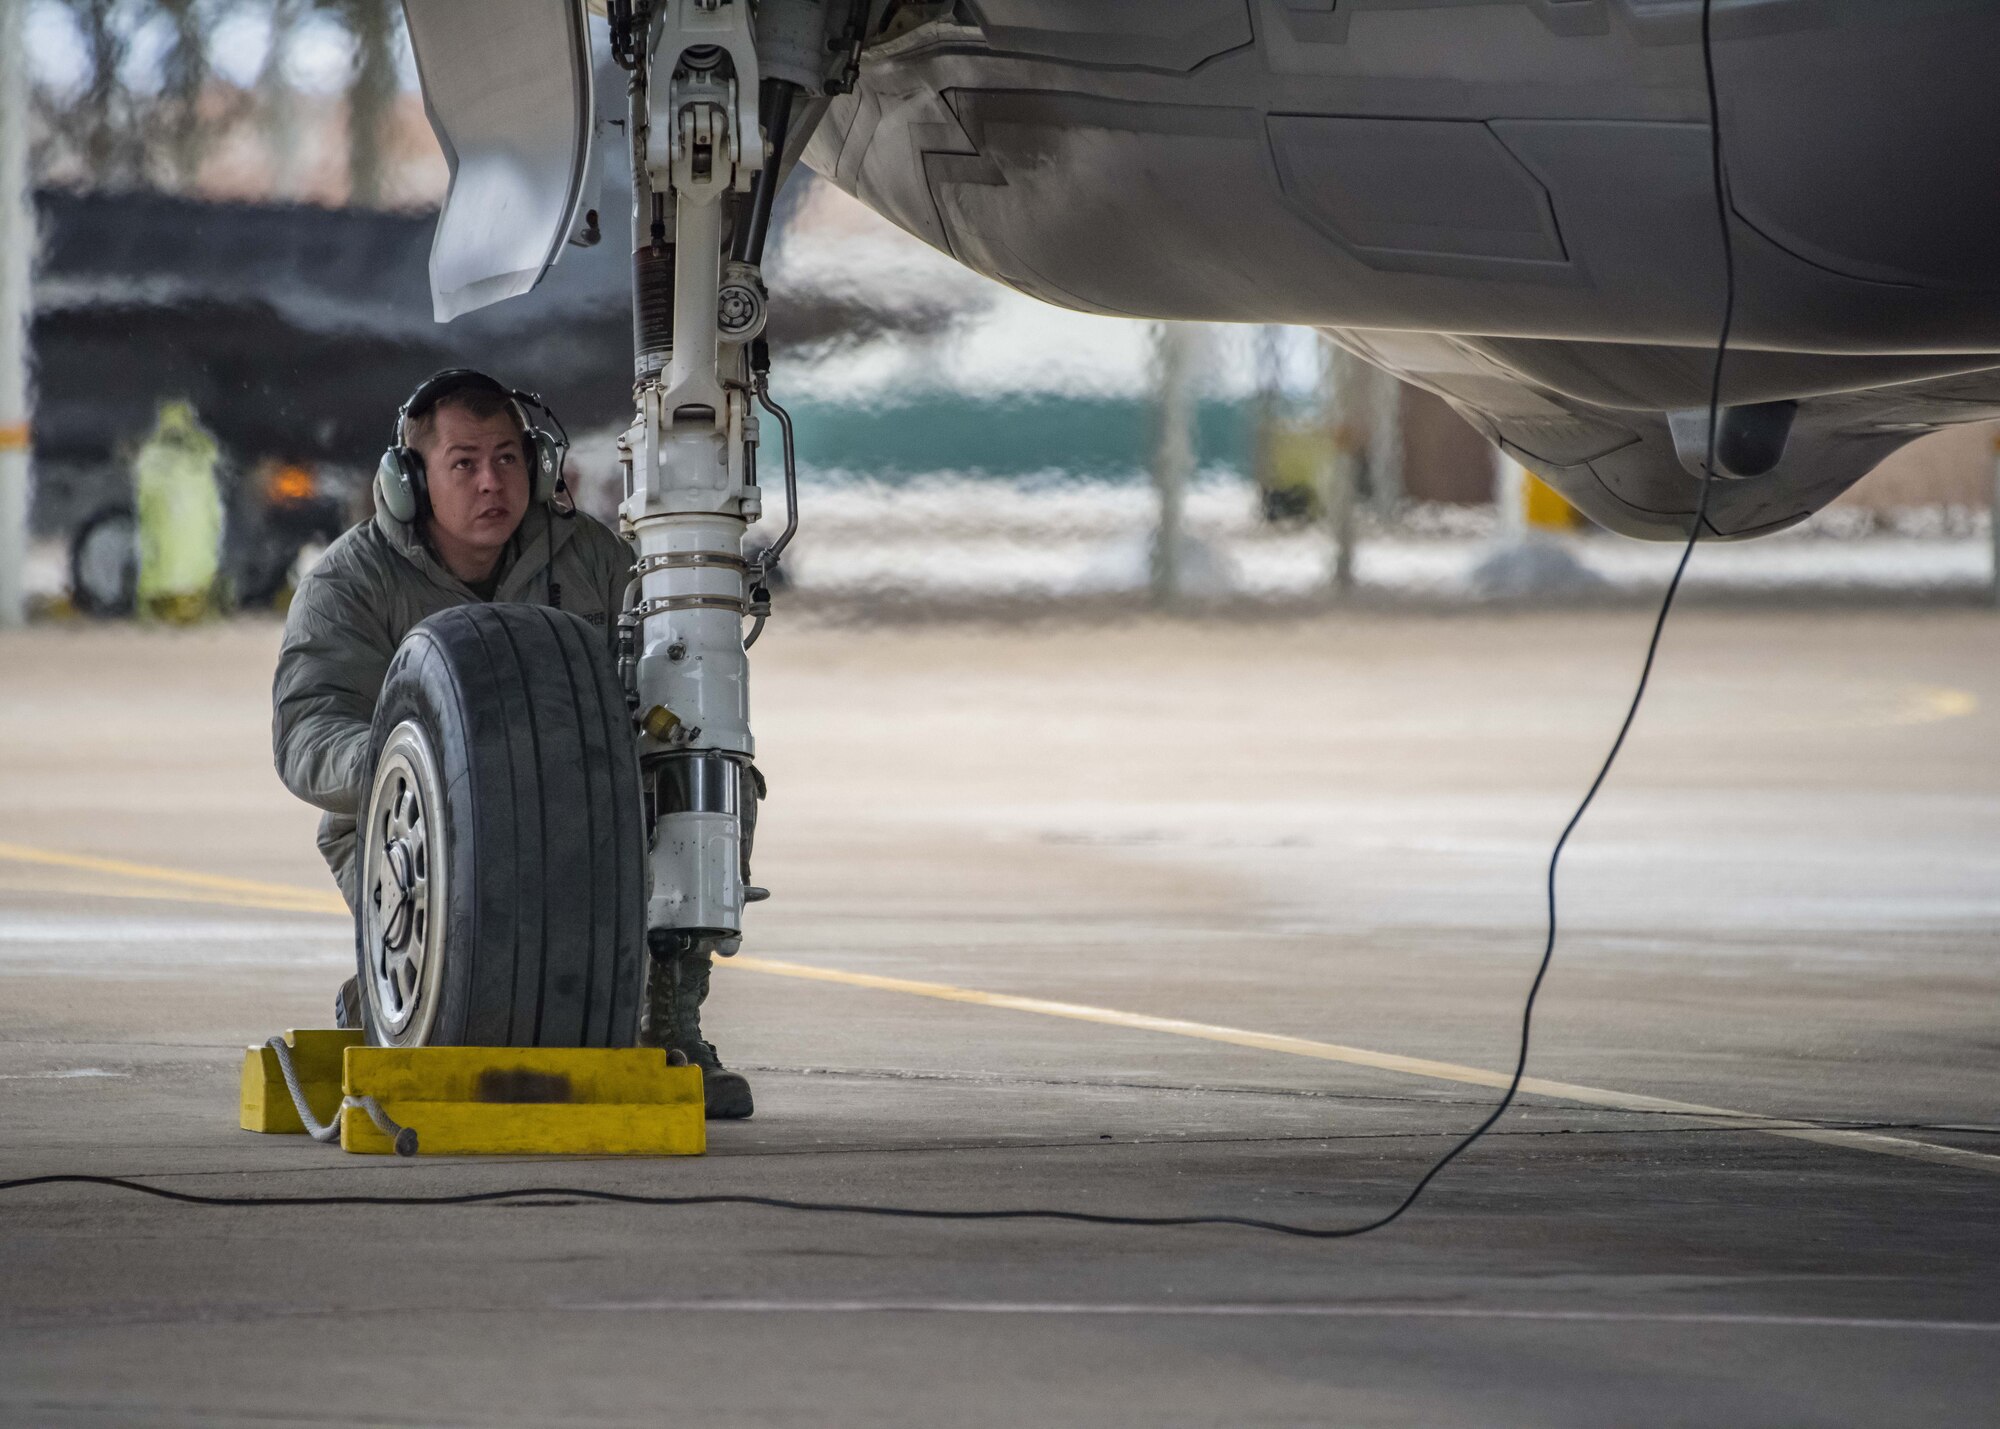 Tech. Sgt. Matthew Hix is an F-35 crew chief in the 419th Aircraft Maintenance Squadron